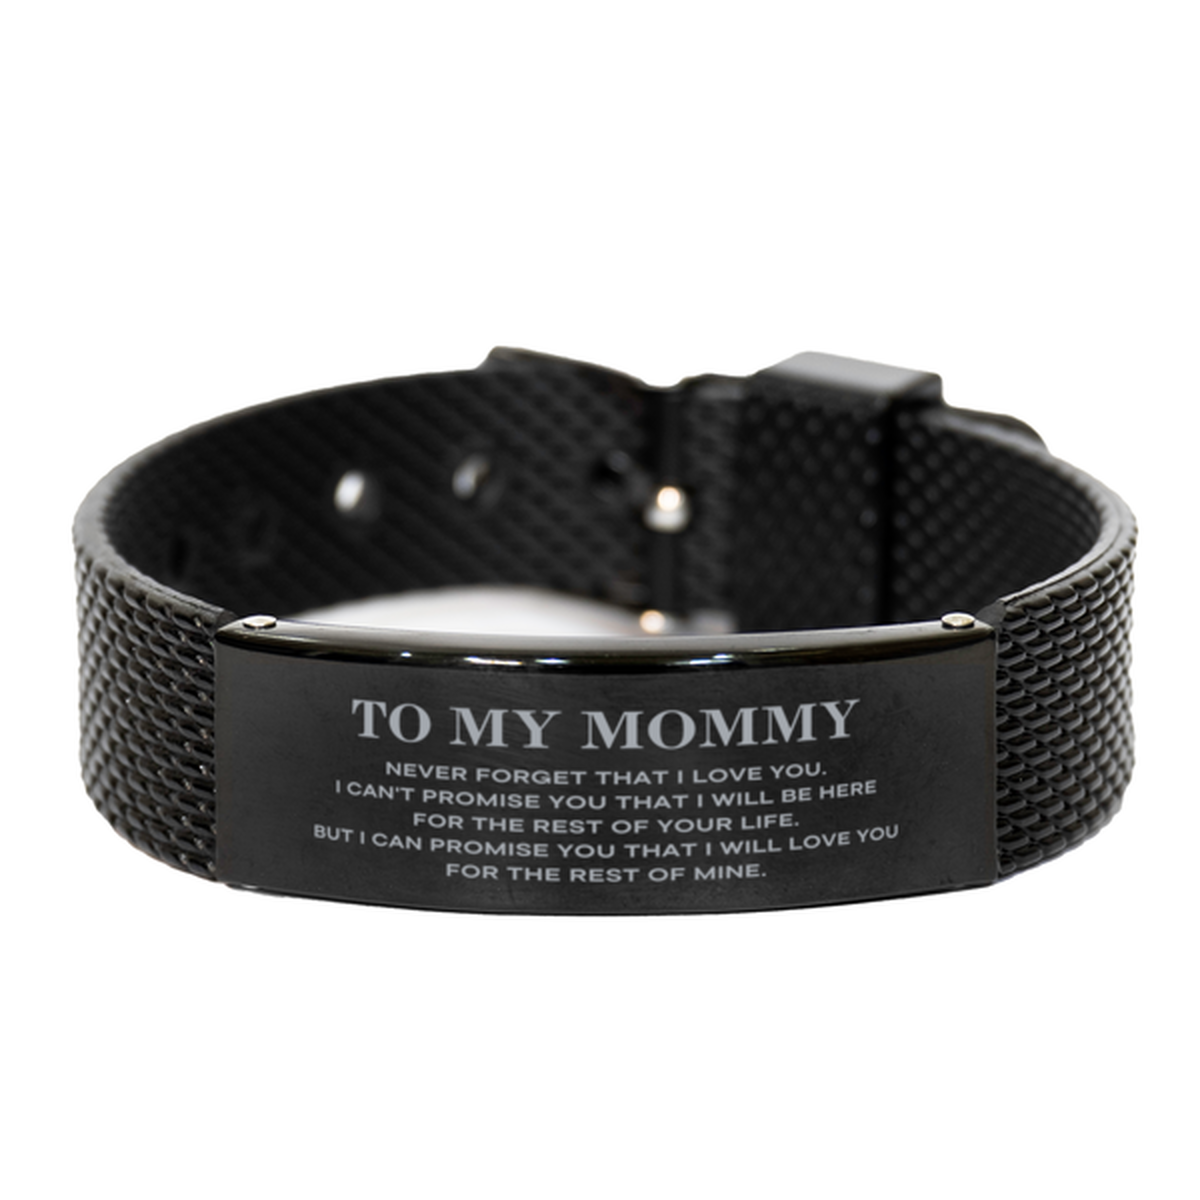 To My Mommy Gifts, I will love you for the rest of mine, Love Mommy Bracelet, Birthday Christmas Unique Black Shark Mesh Bracelet For Mommy